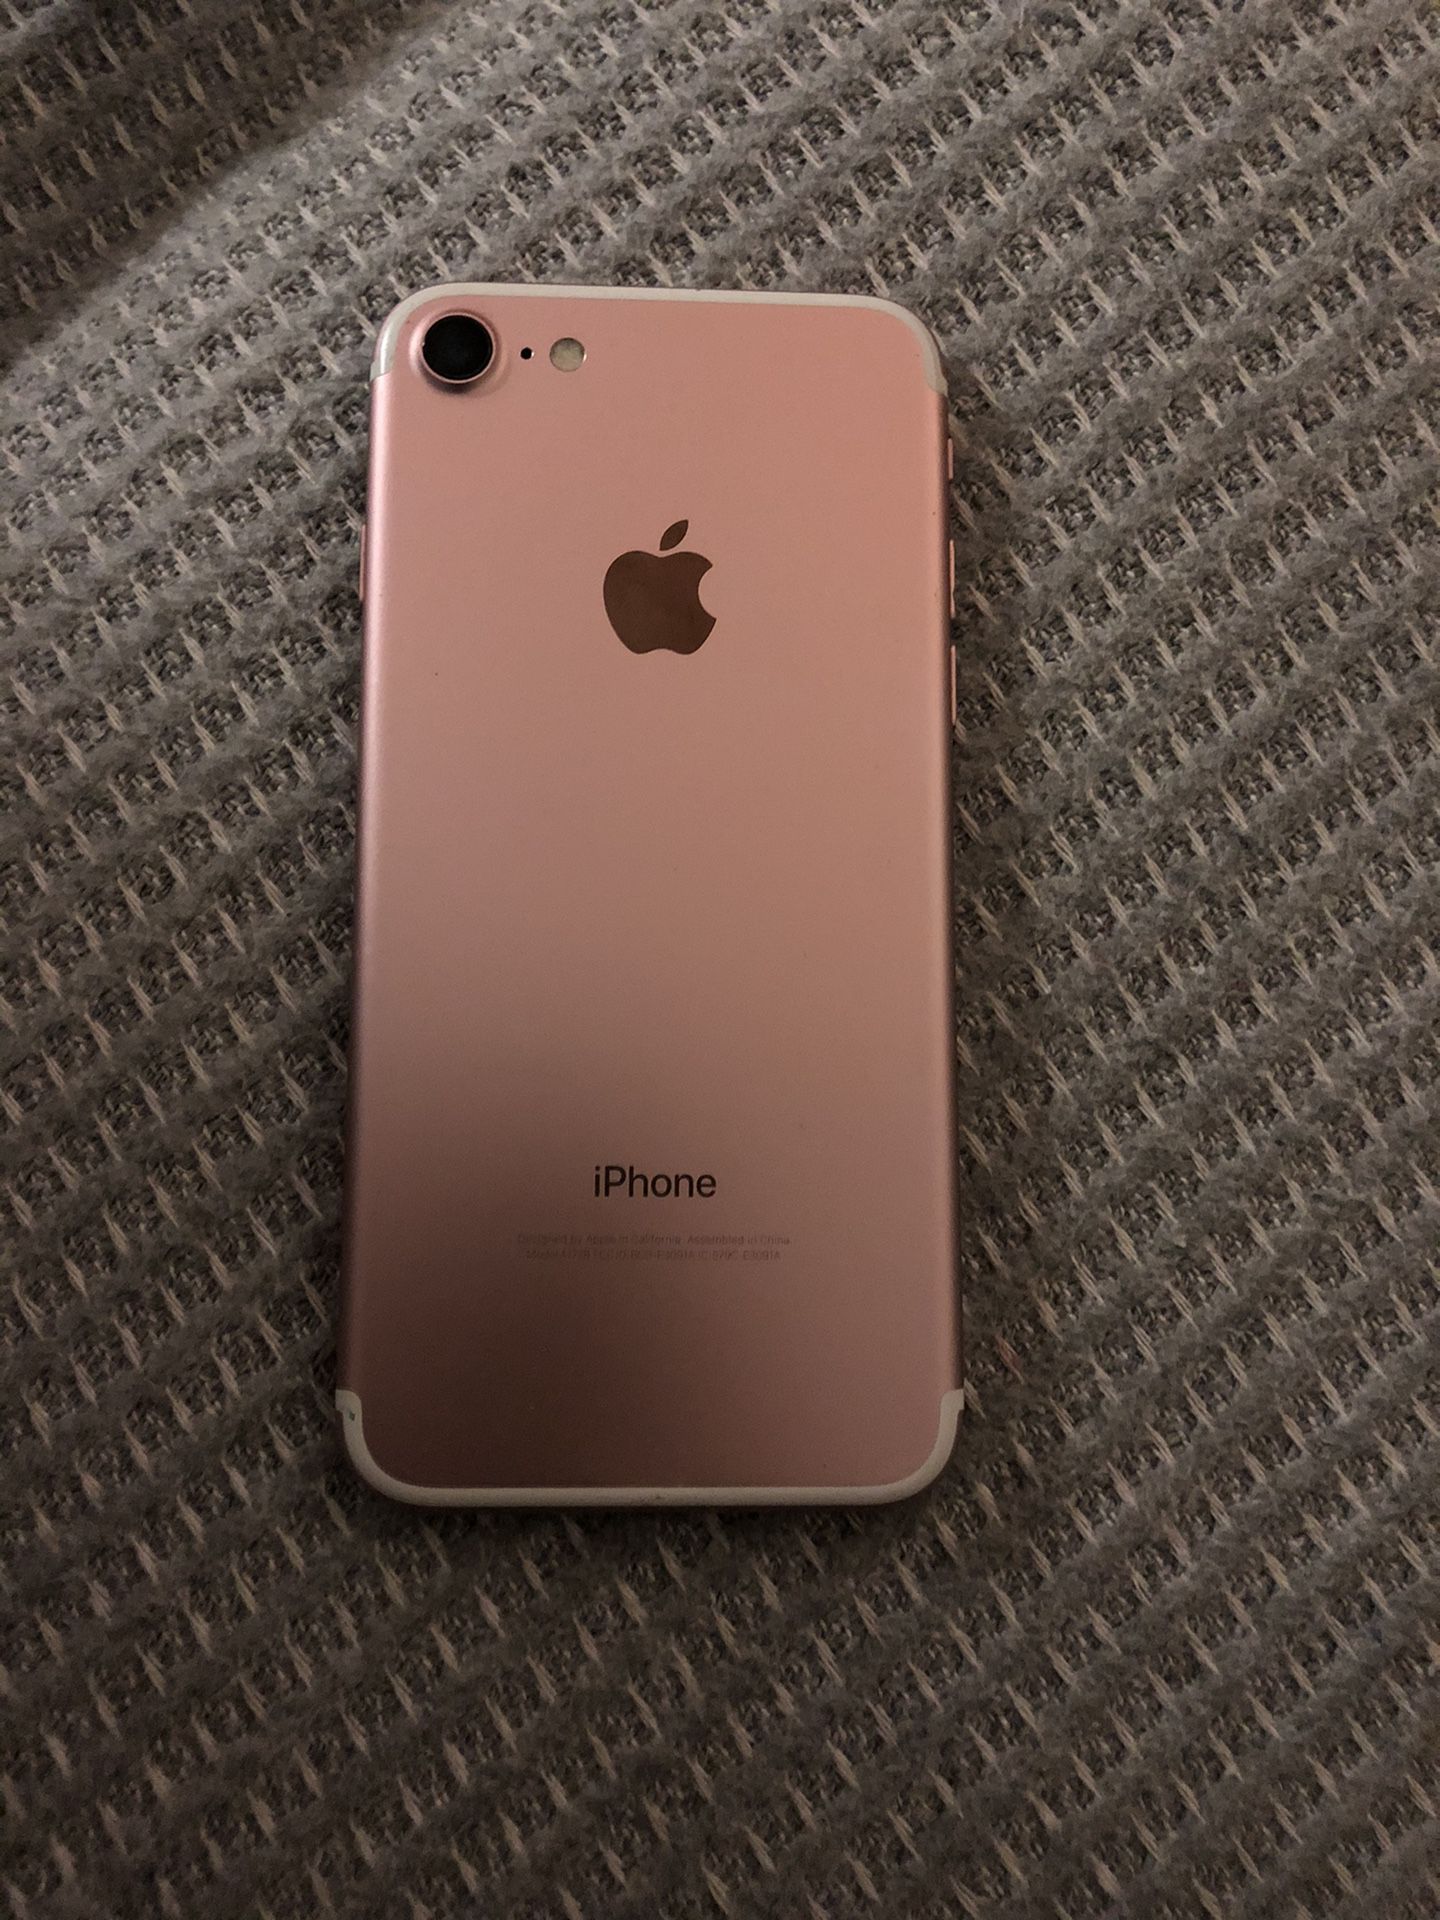 iphone 7 128 gb unlock trade with iphone x,xr, and 250$